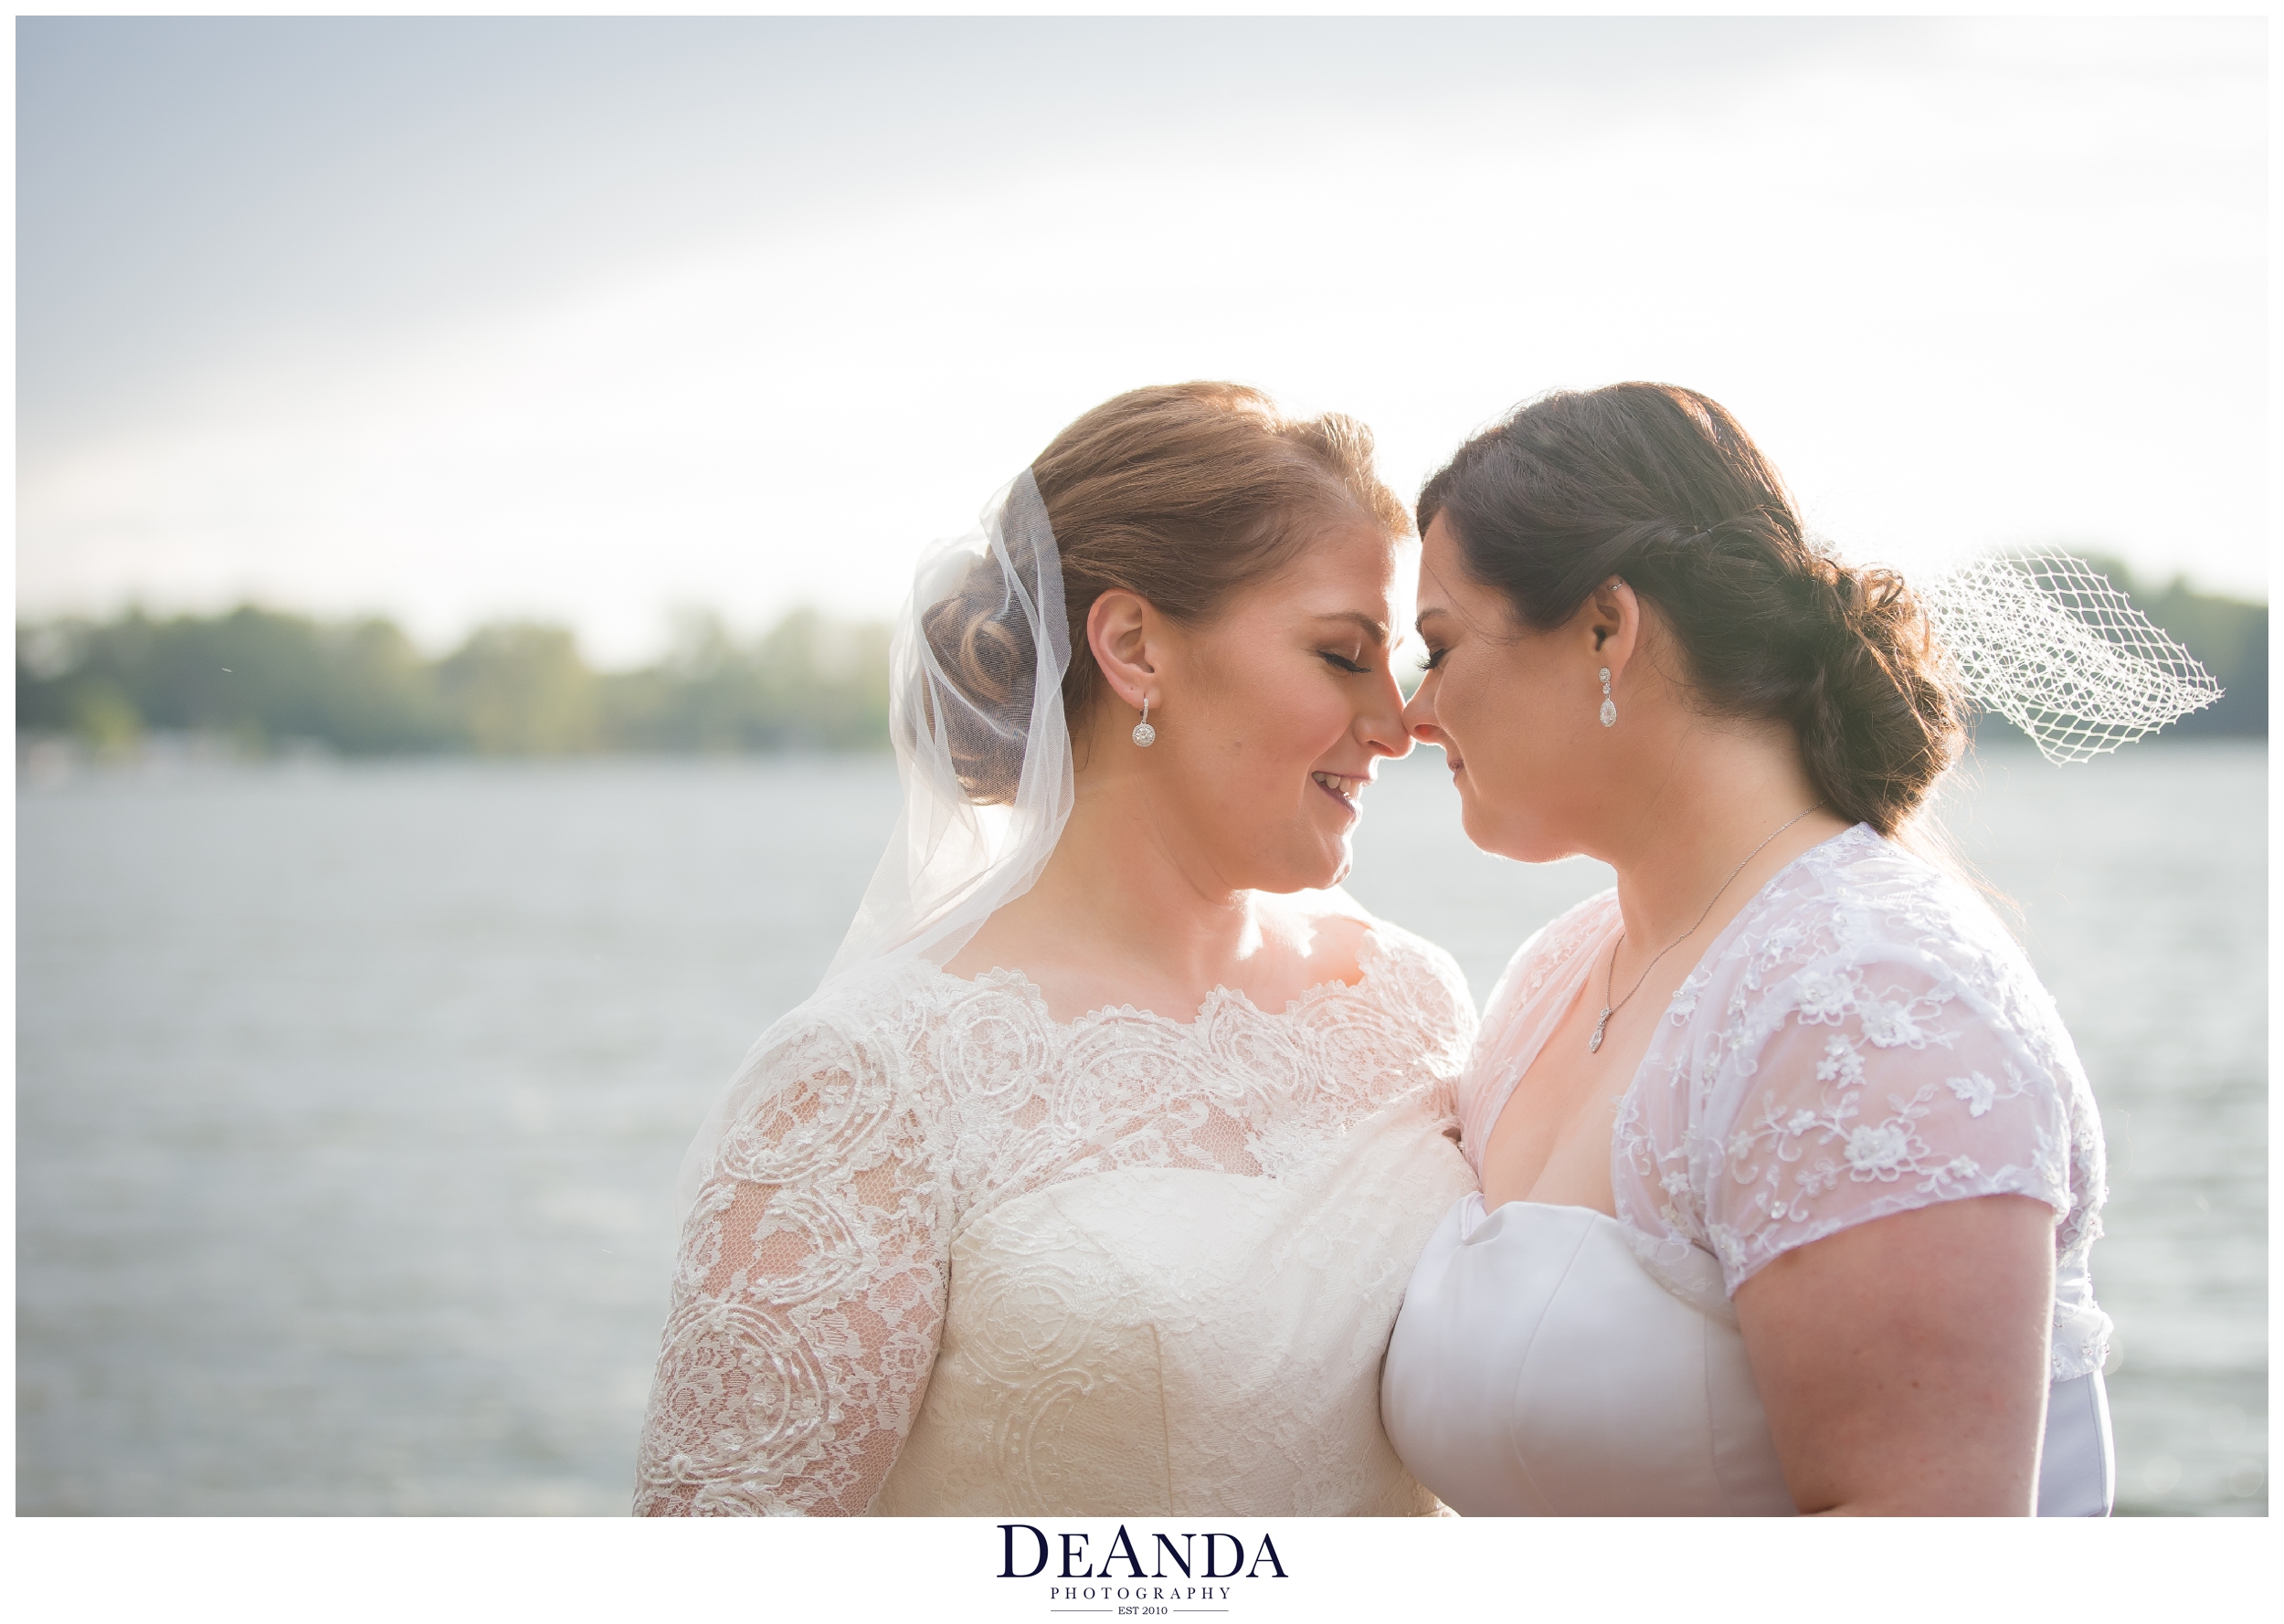 beautiful brides portrait of same sex couple on a lake pier over the water